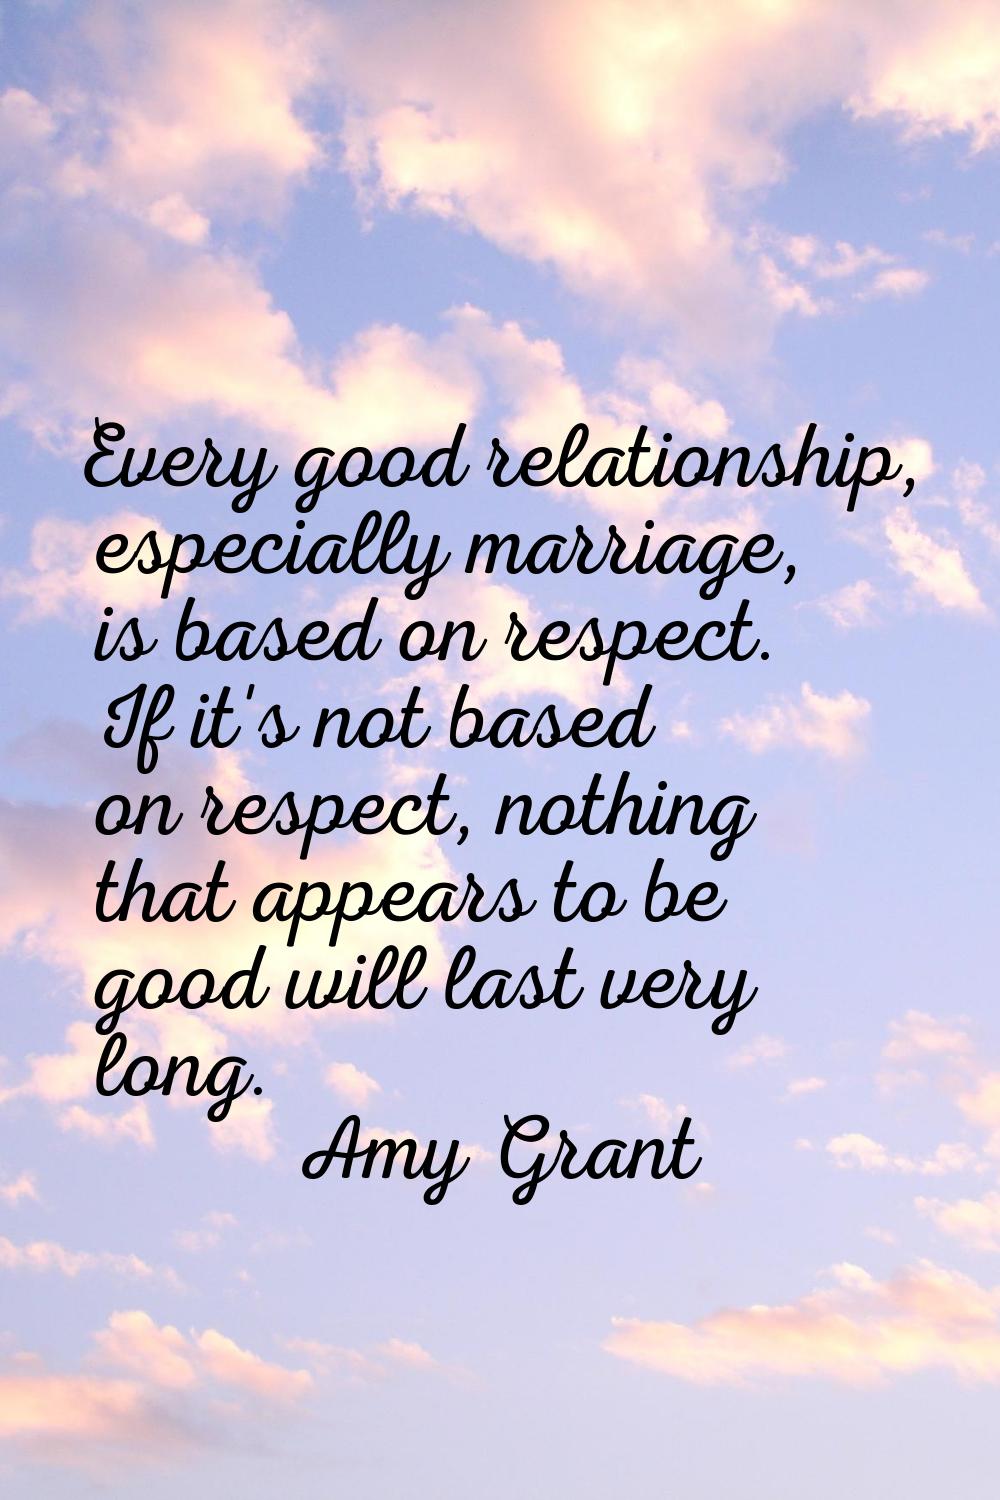 Every good relationship, especially marriage, is based on respect. If it's not based on respect, no